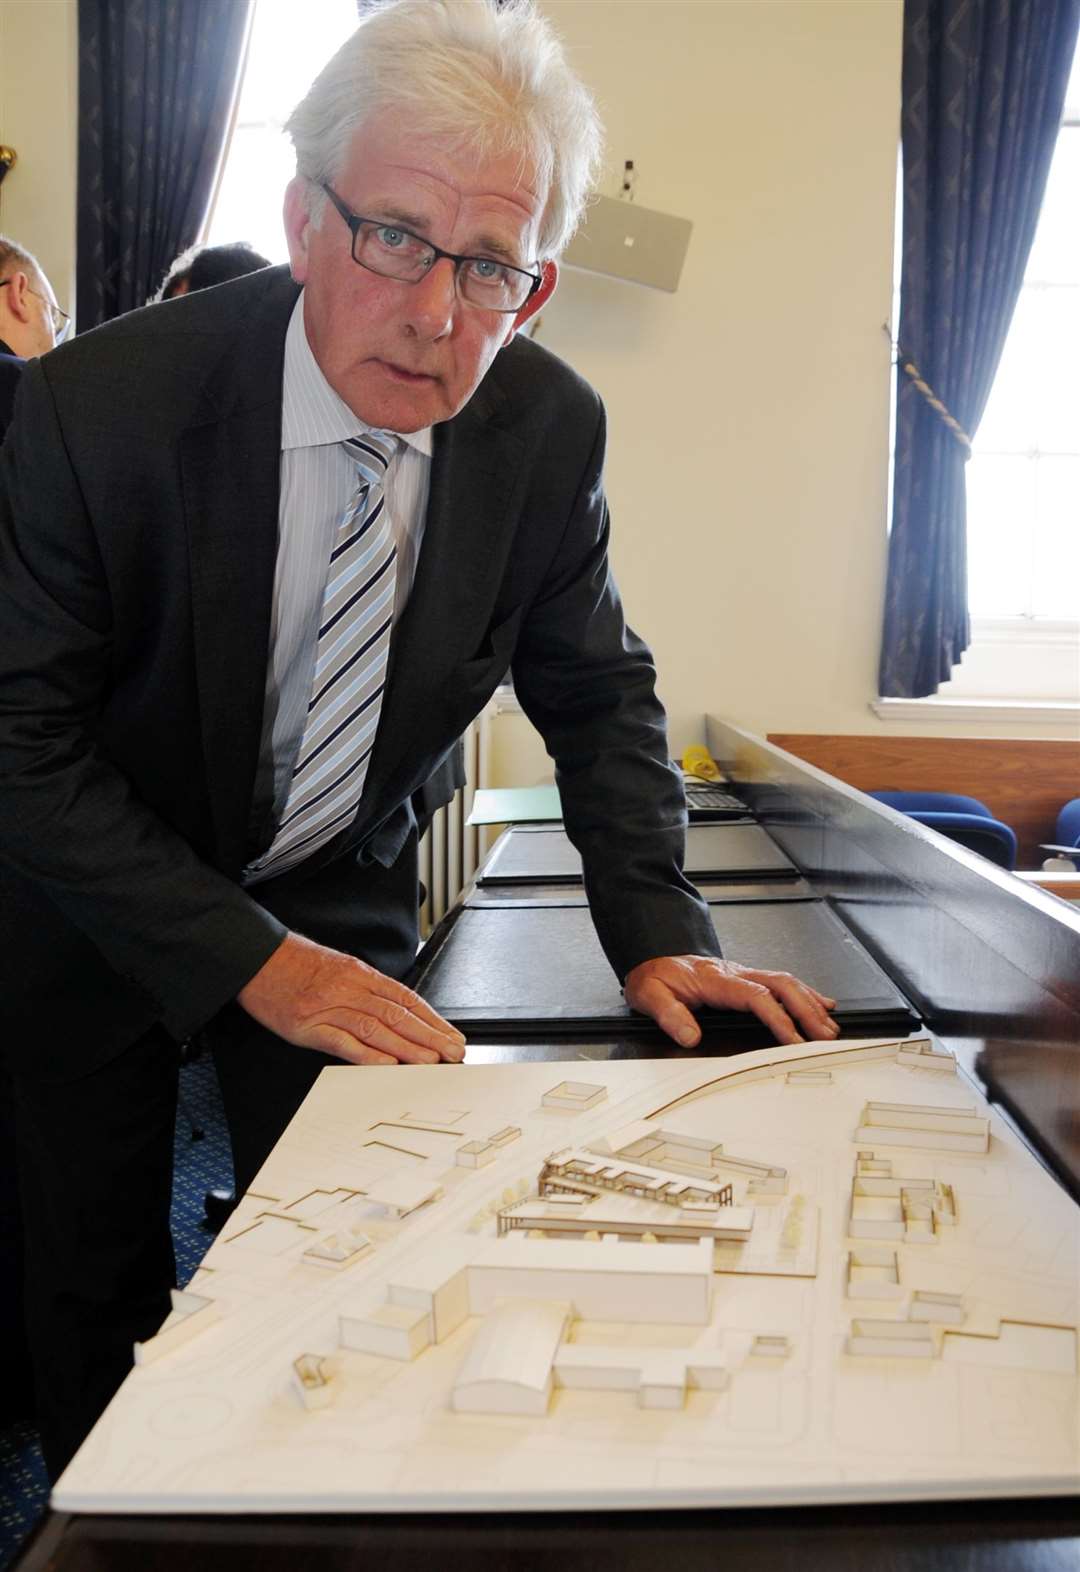 Sherriff Principal Pyle looking at plans for new court buildings.